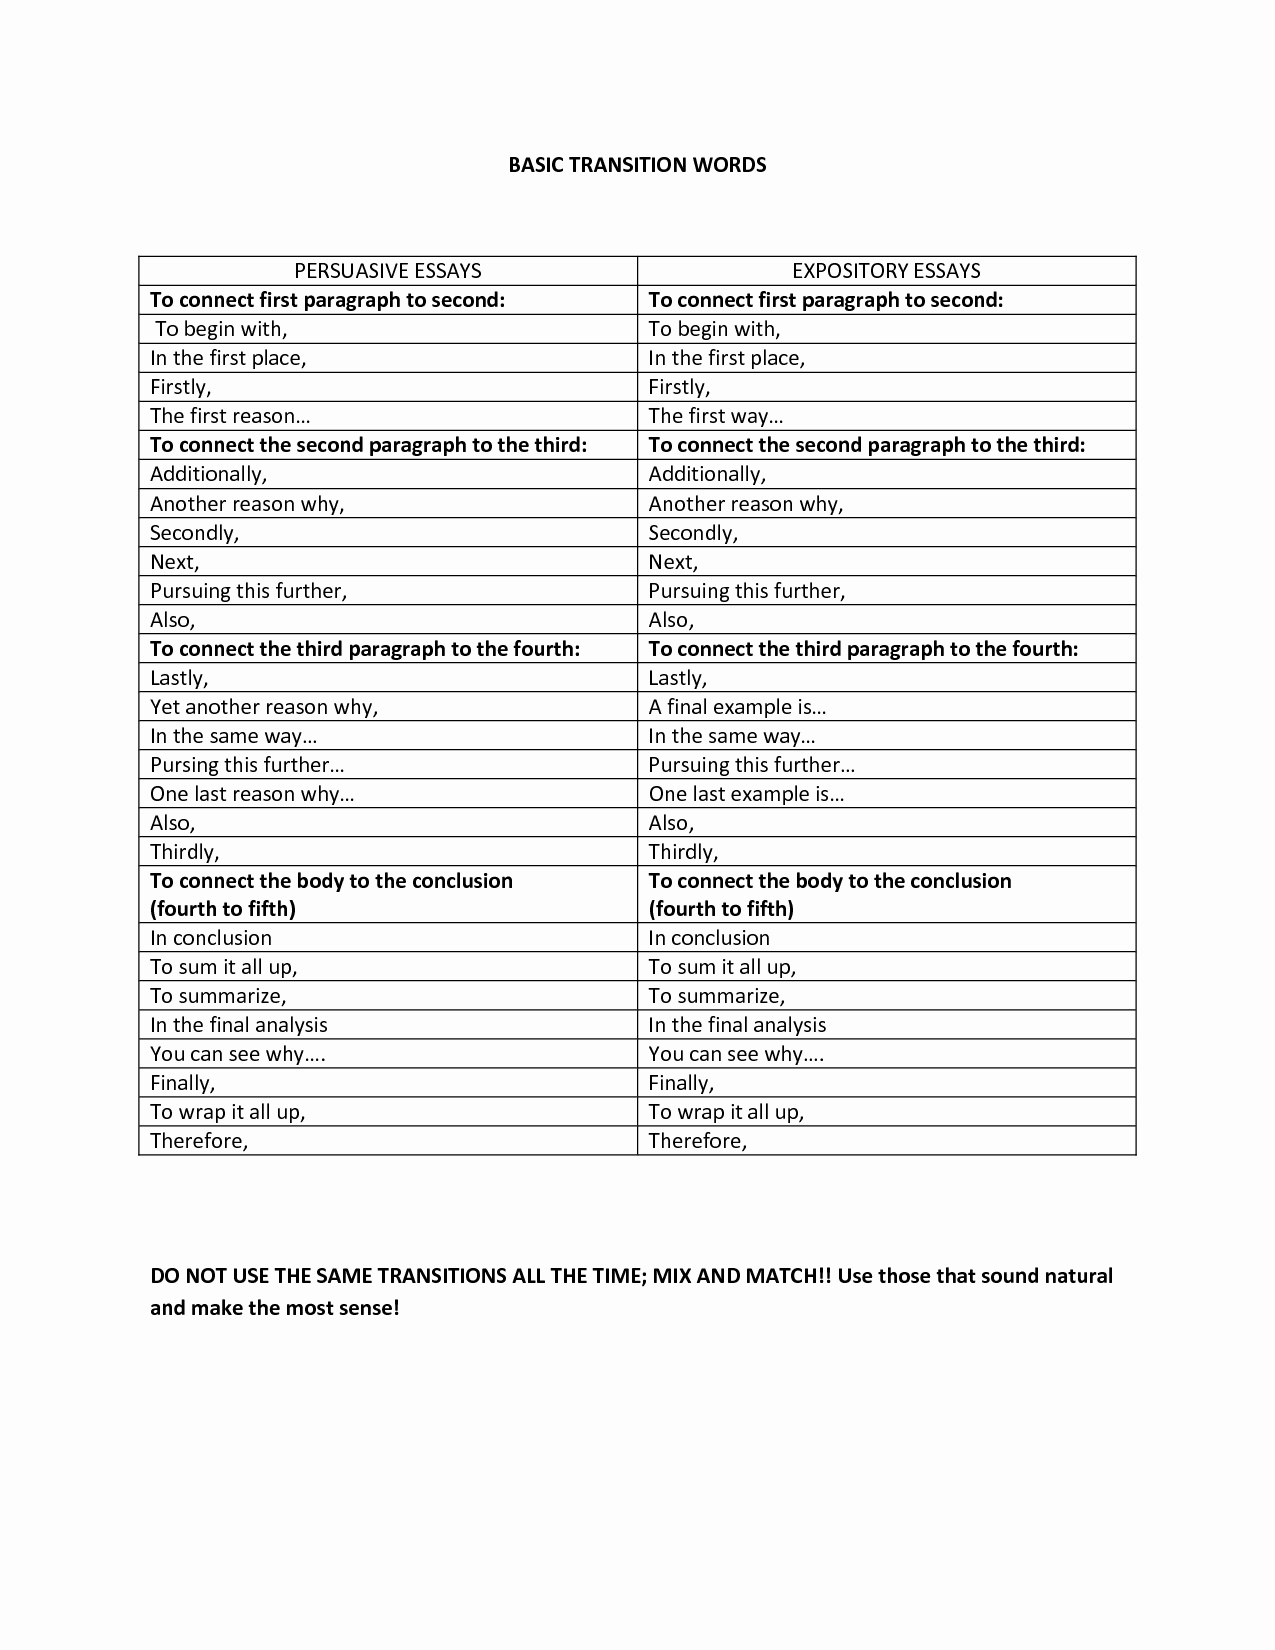 Paragraph Transition Words for Essays Lovely Transition Words Persuasive Essay Google Search